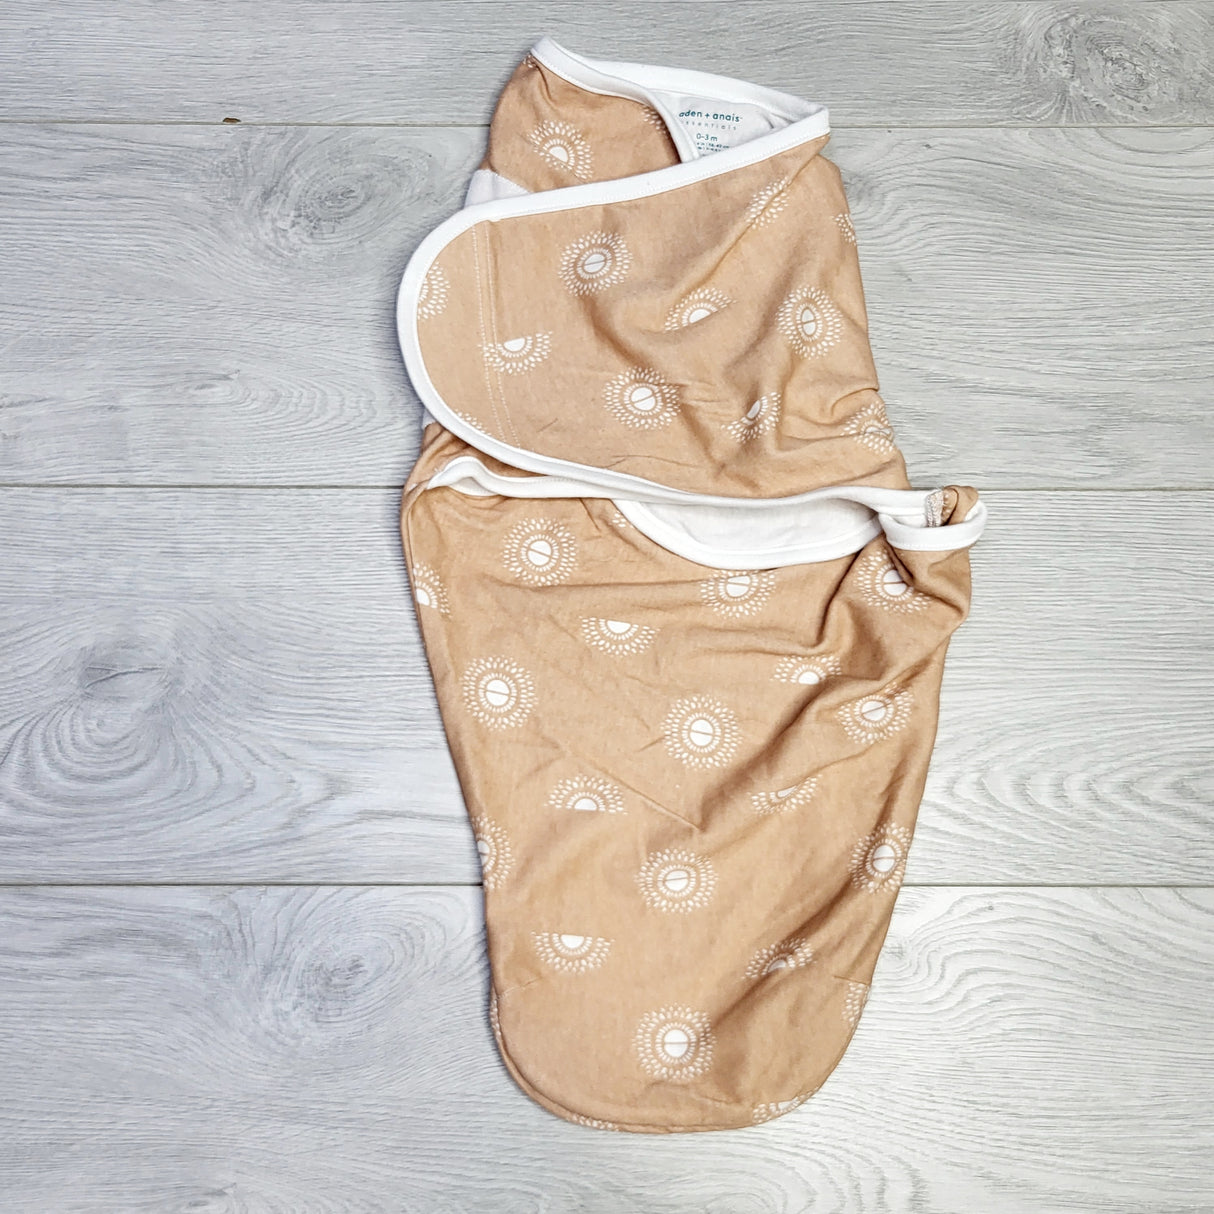 CRTH2 - Aden and Anais cotton swaddle with suns. Size 0-3 months